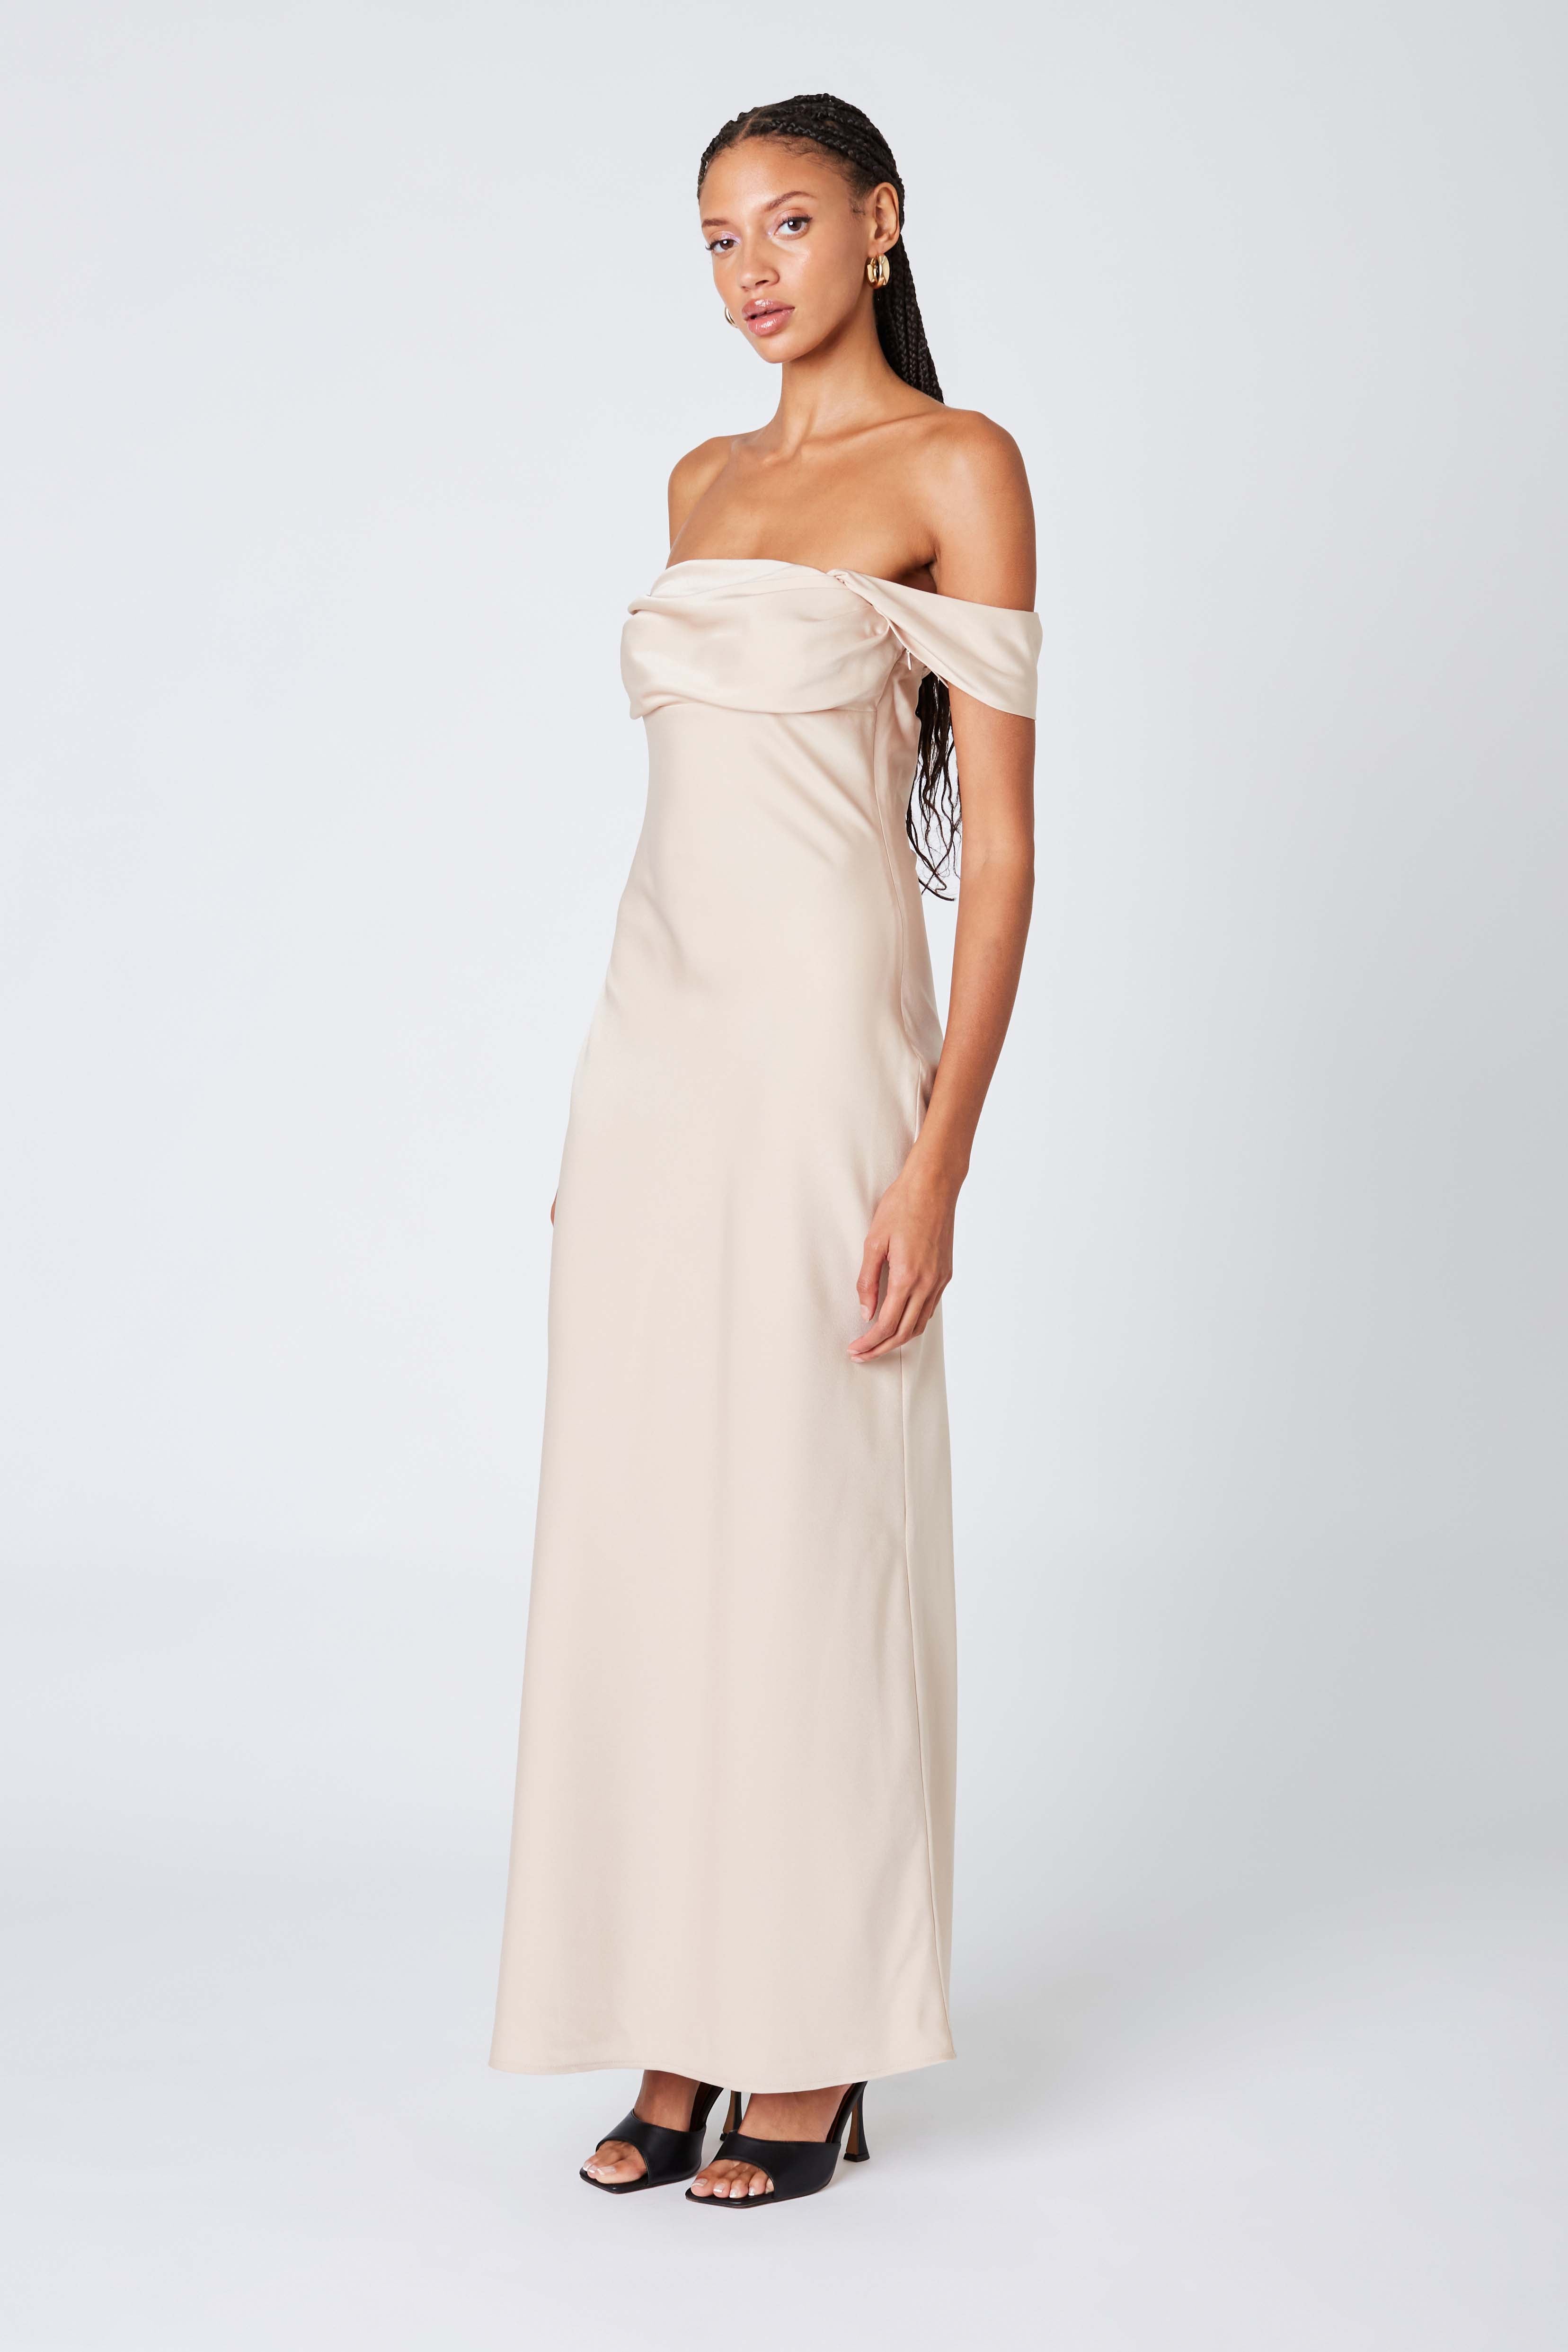 Satin Off the Shoulder Maxi Dress in Buff Side View